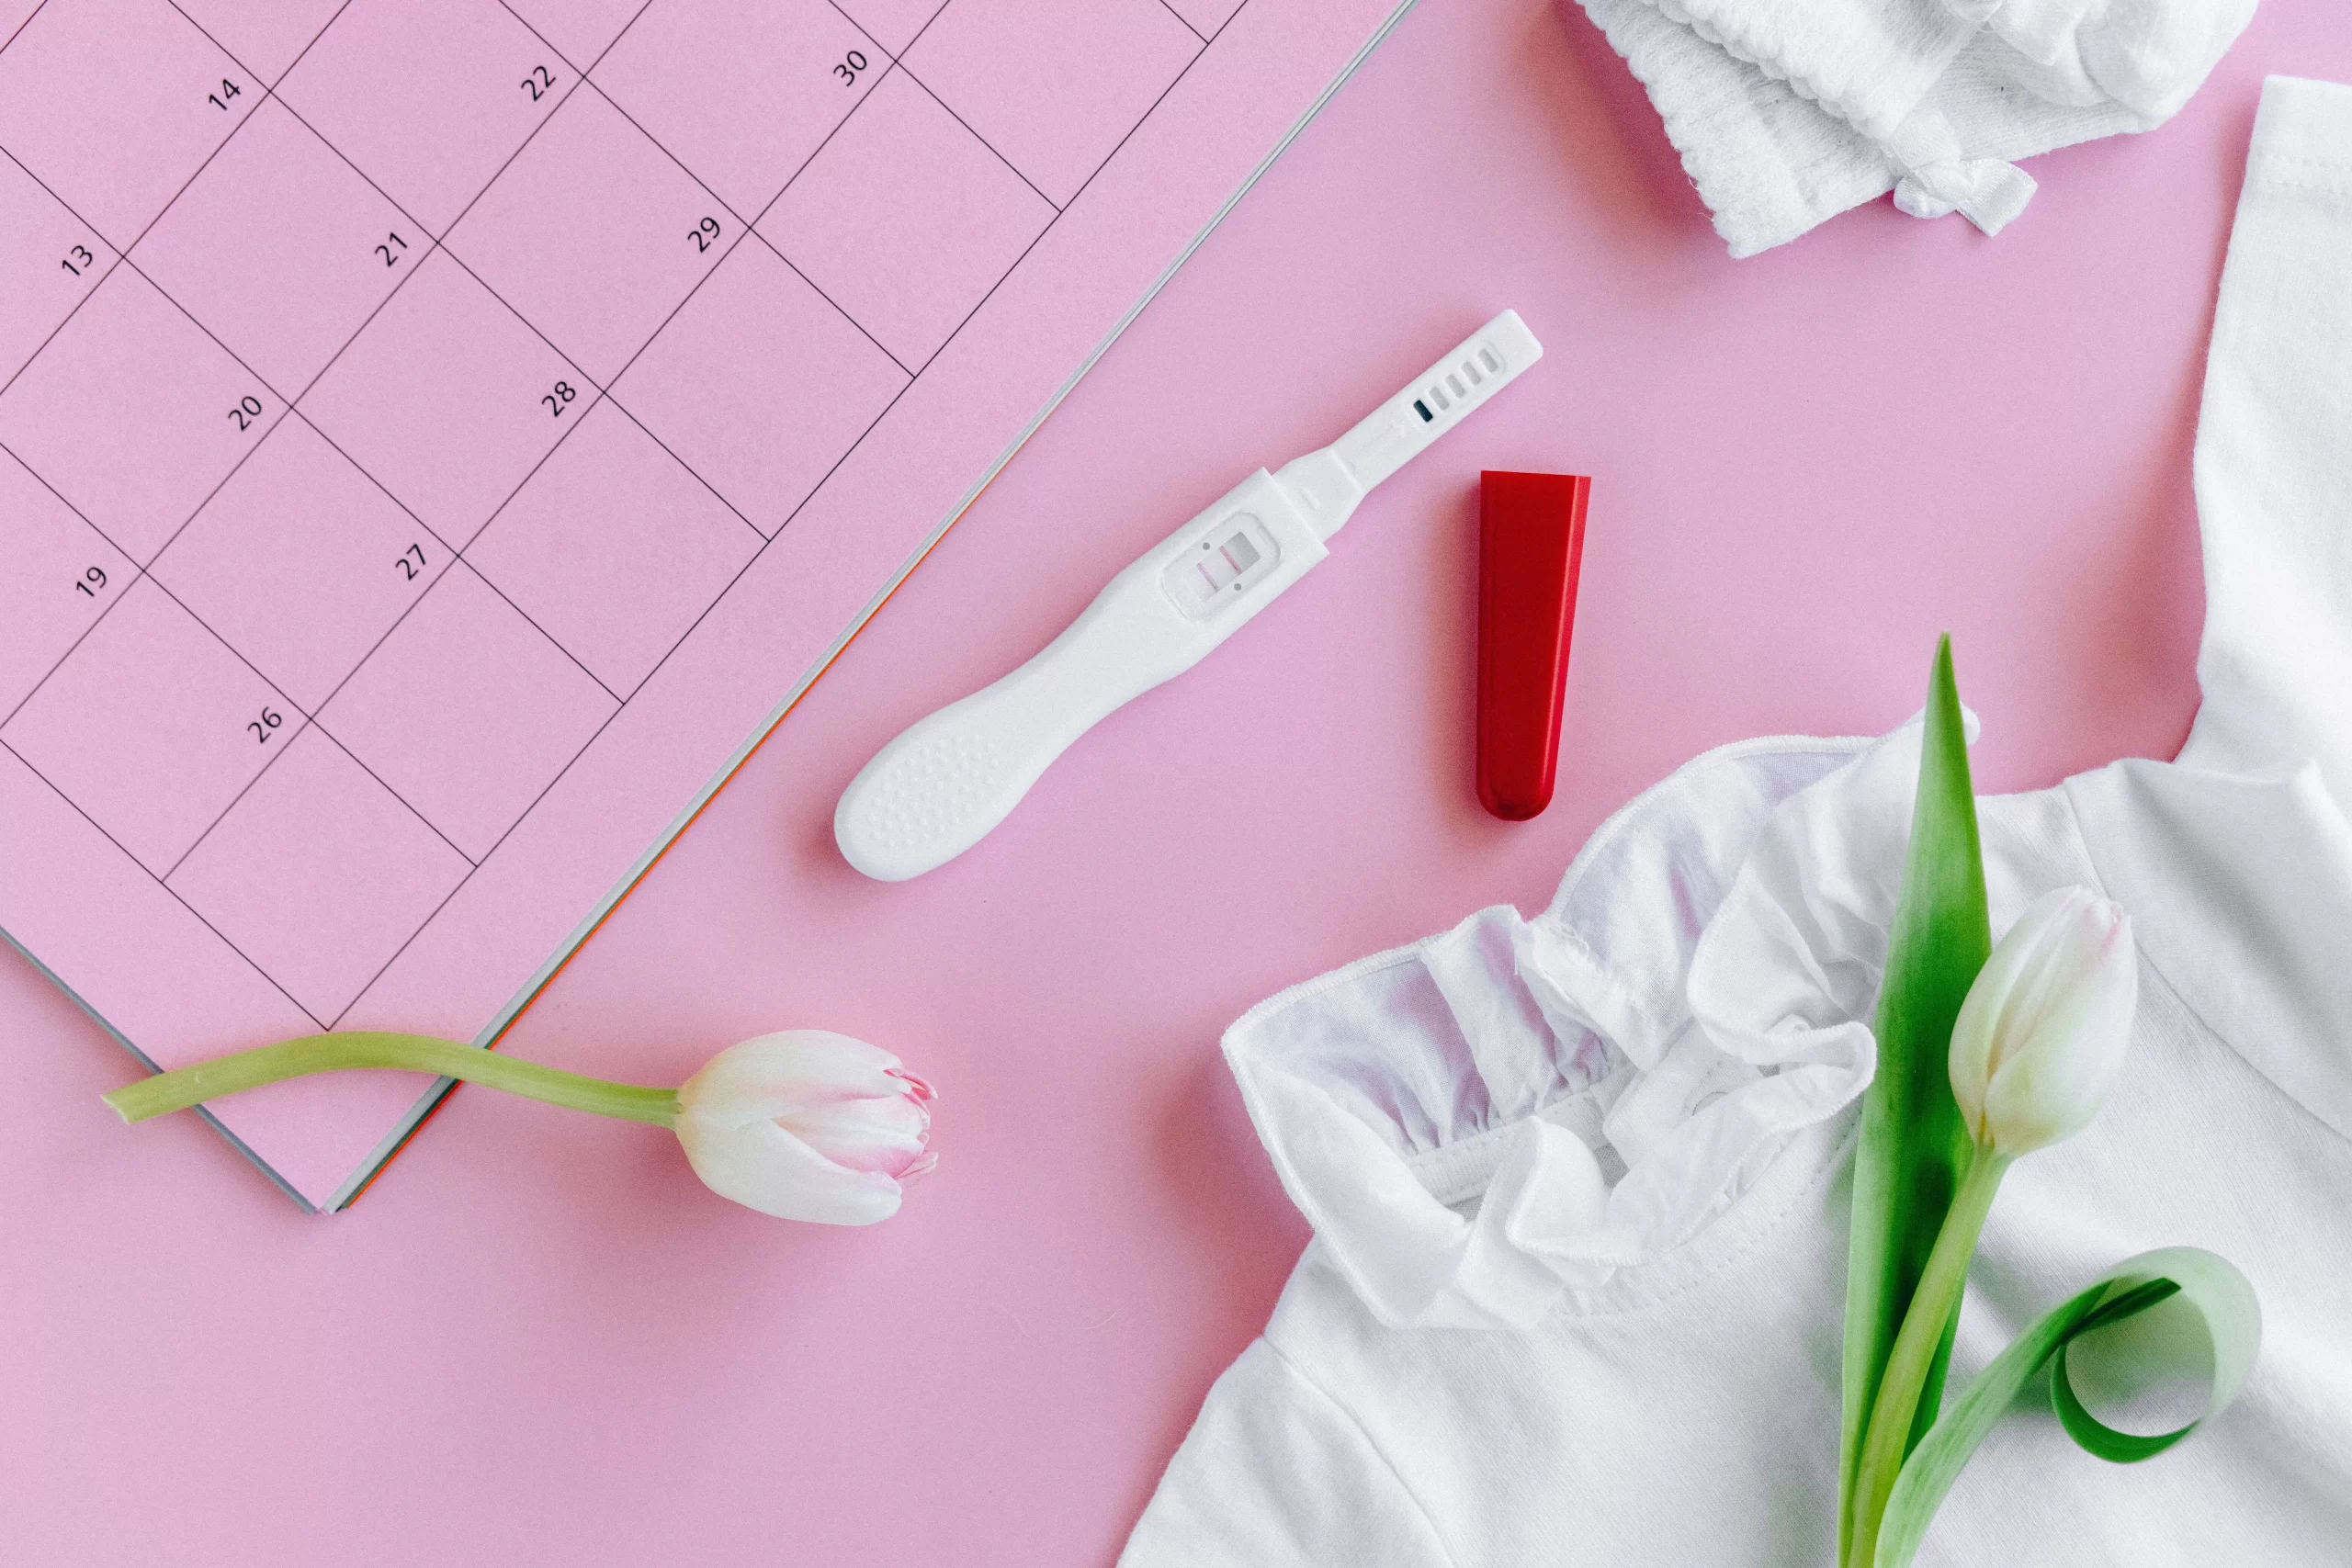 The ovulation test: the essentials to know